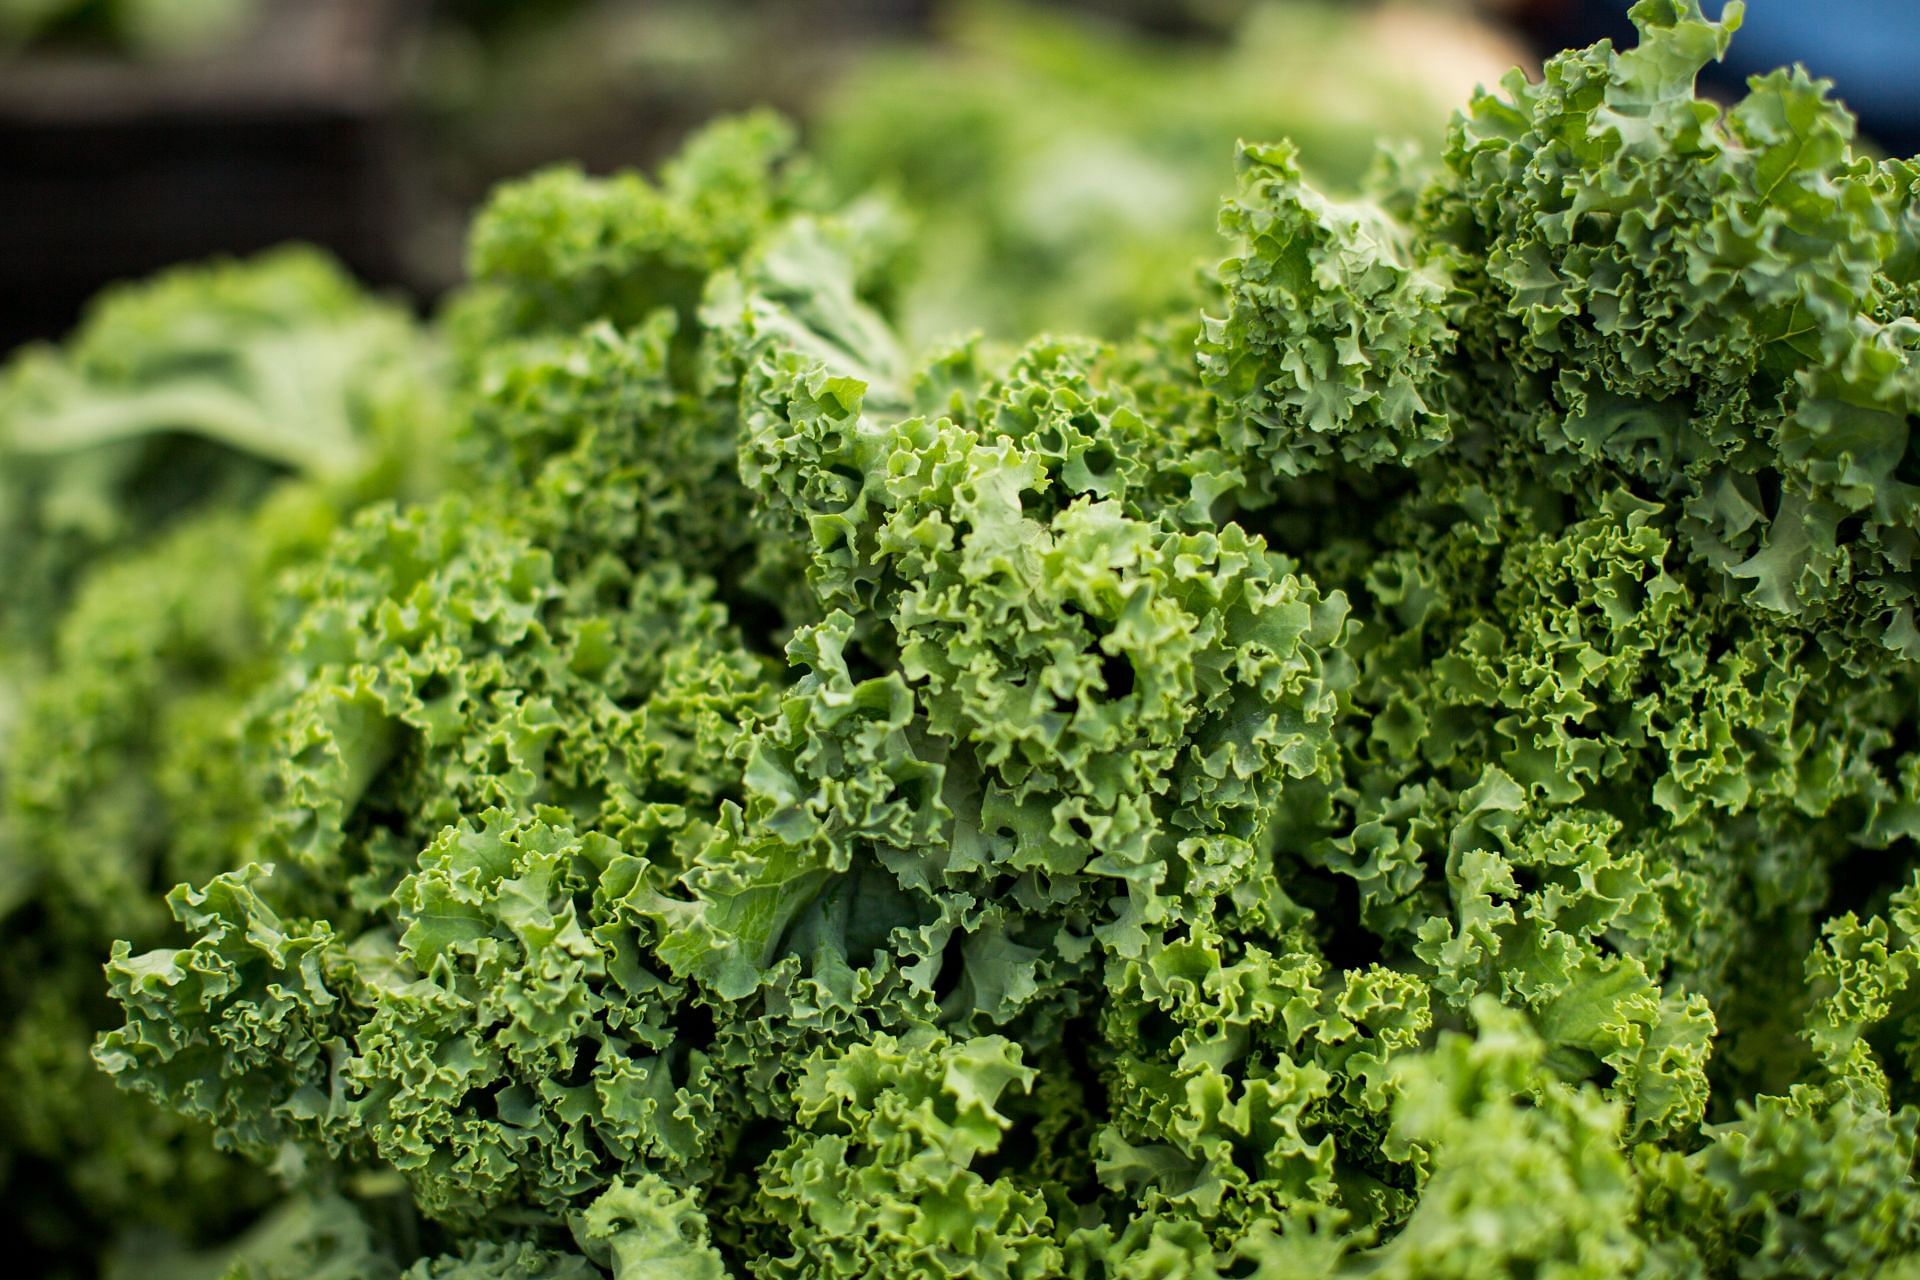 Health benefits of kale include improving your heart health and overall fitness. (Image via Unsplash / Char Beck)